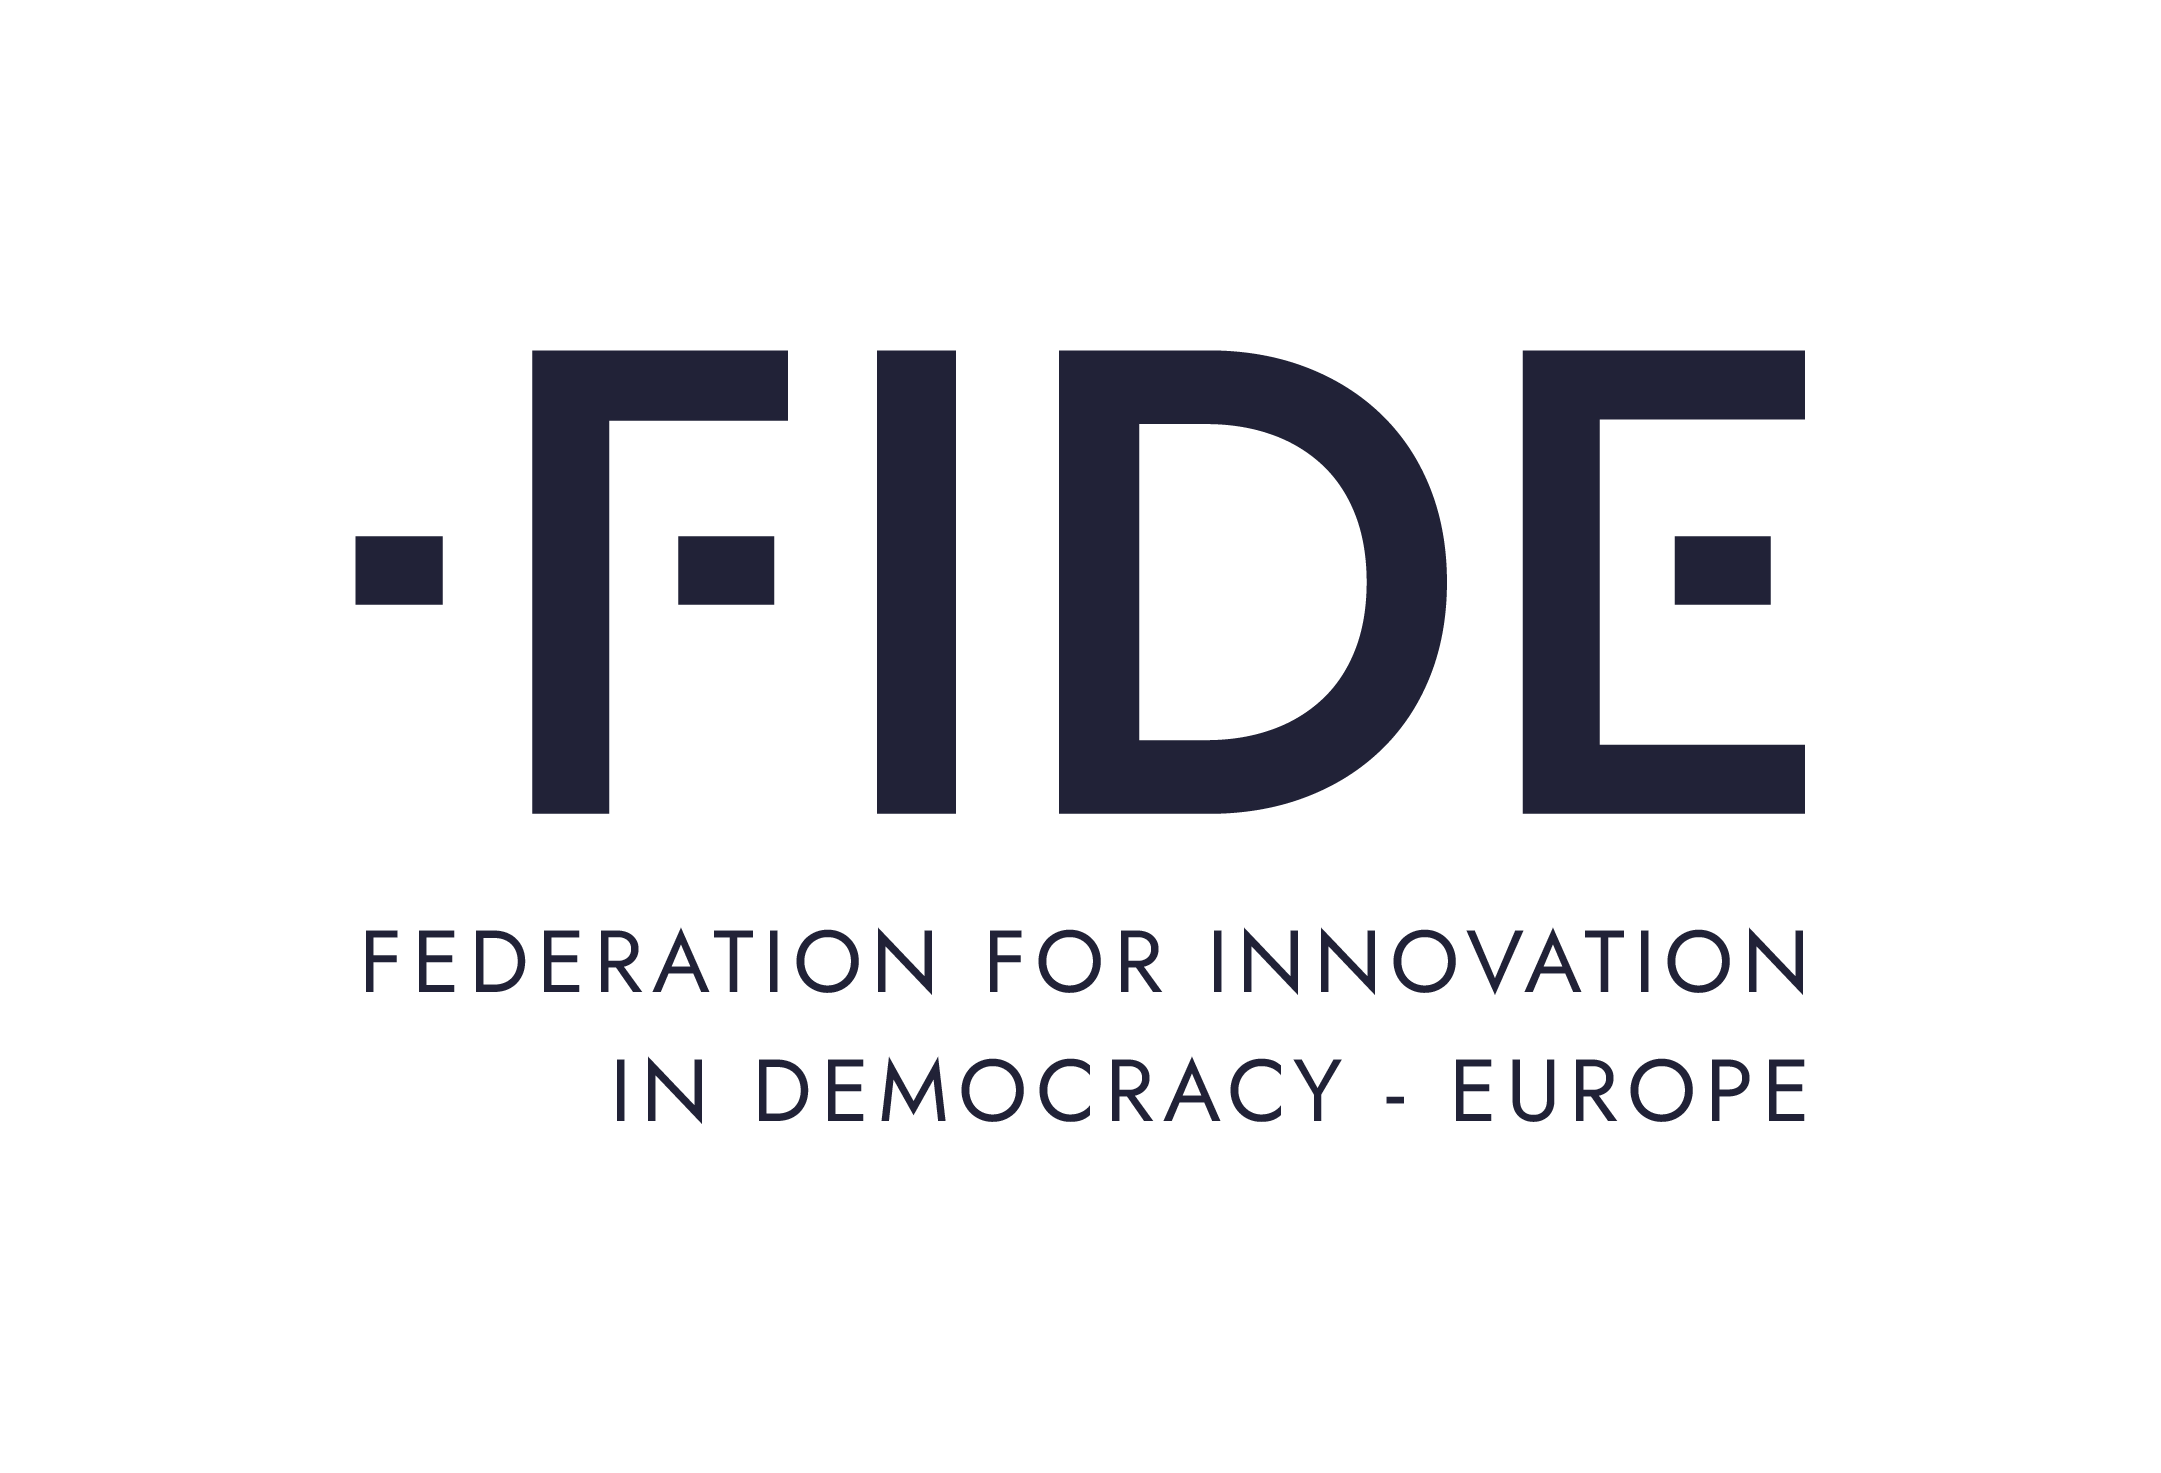 Federation for Innovation in Democracy Europe (FIDE) logo